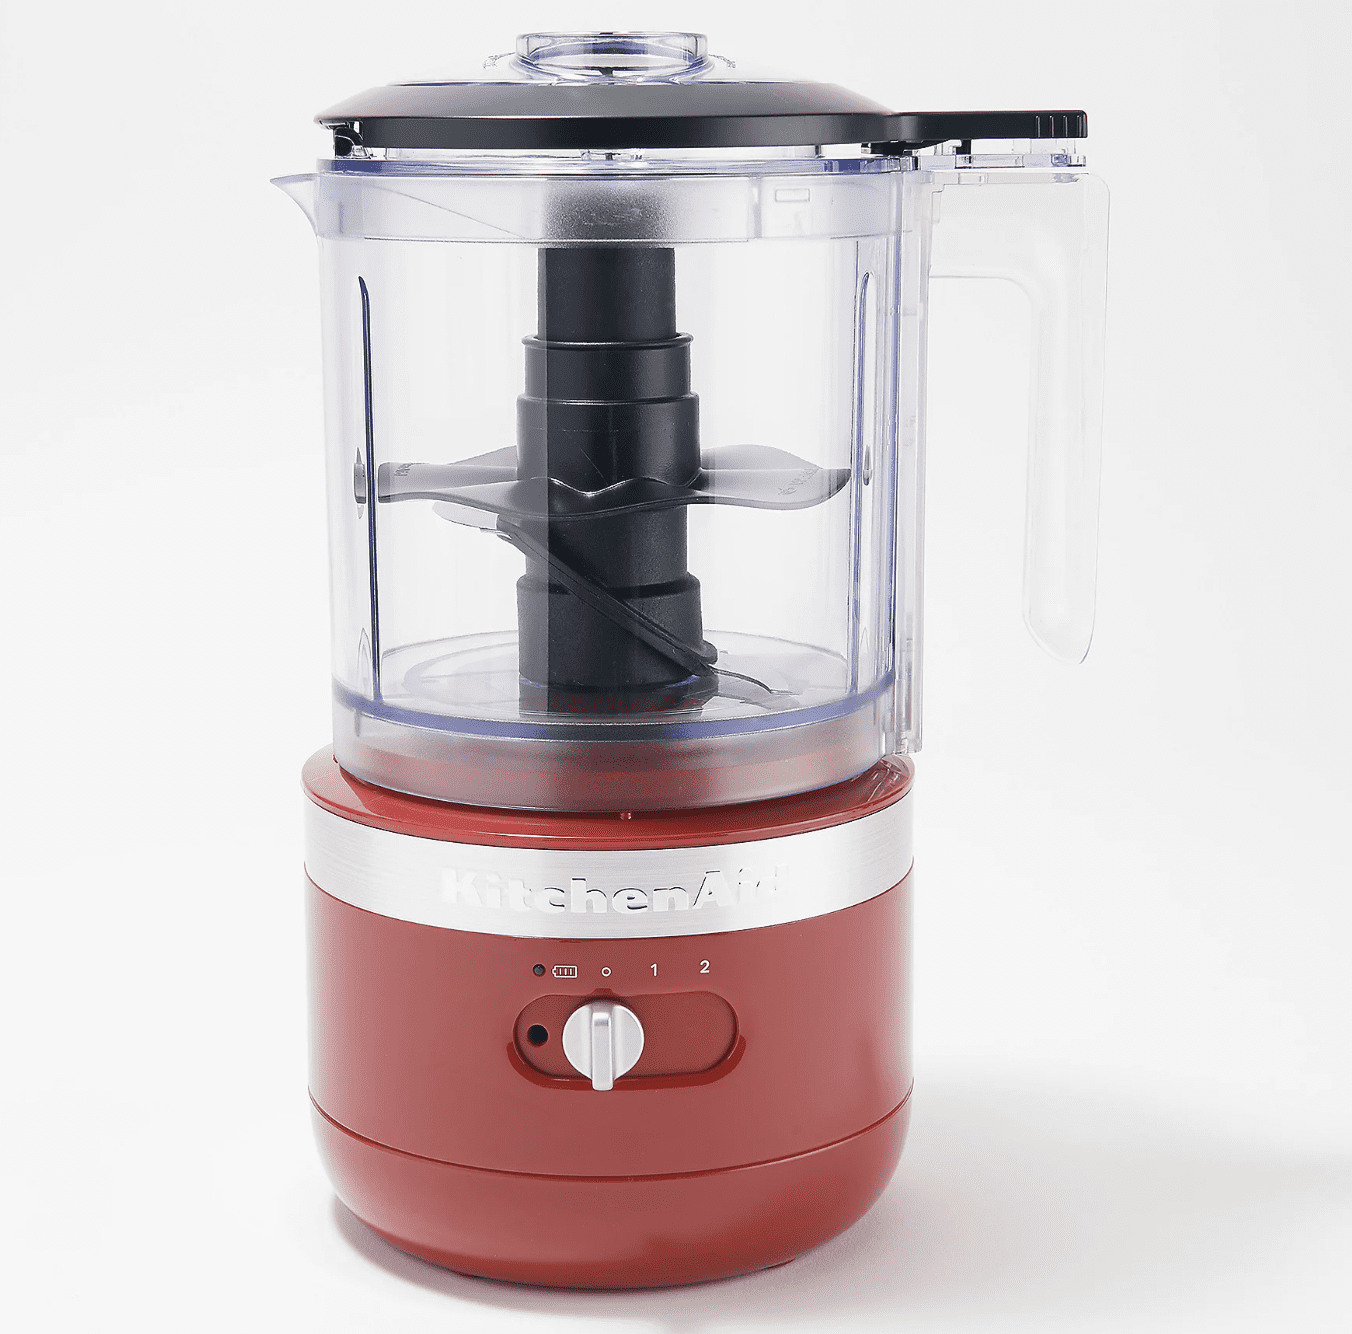 https://cdn.apartmenttherapy.info/image/upload/v1664206995/KitchenAid-Cordless-5-Cup-Chopper-with-Whisk-Accessory.png